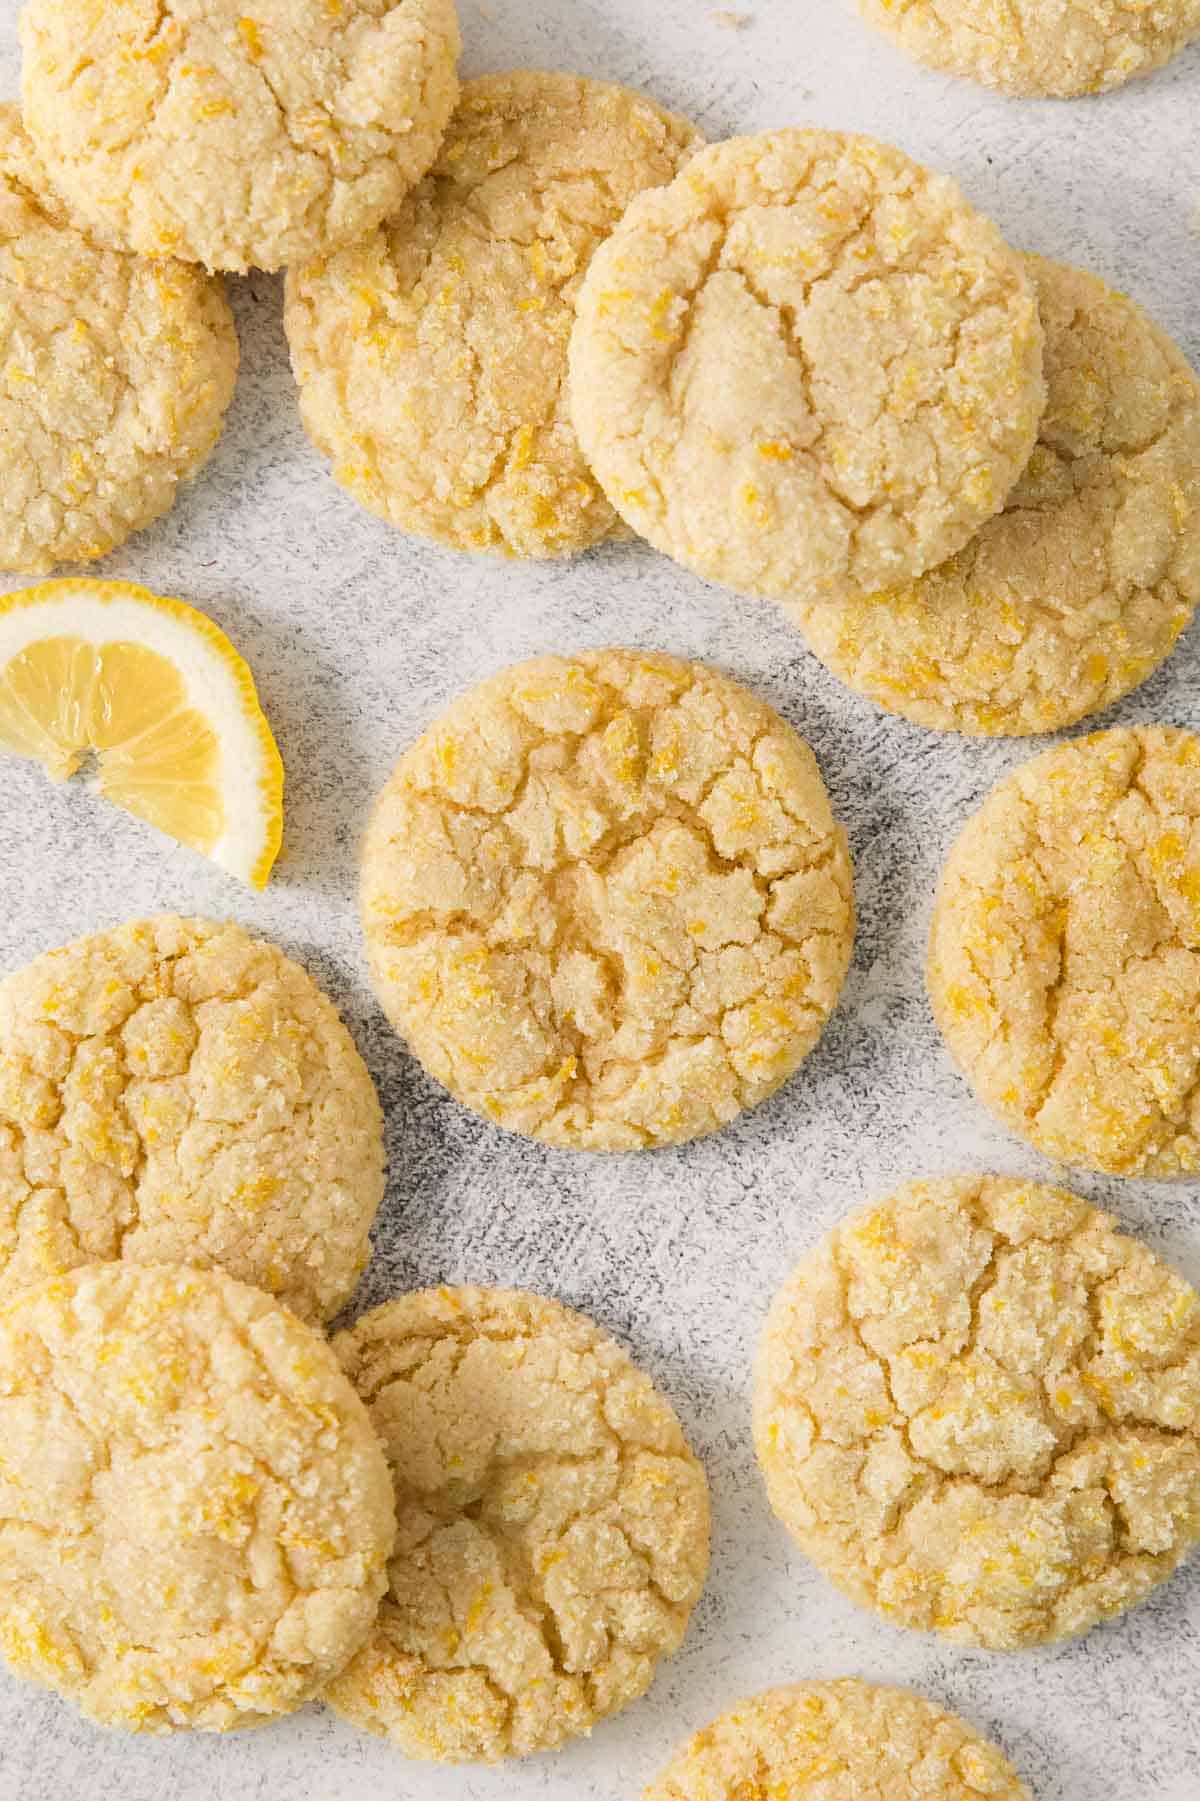 Lemon cookies on parchment paper with a wedge of lemon